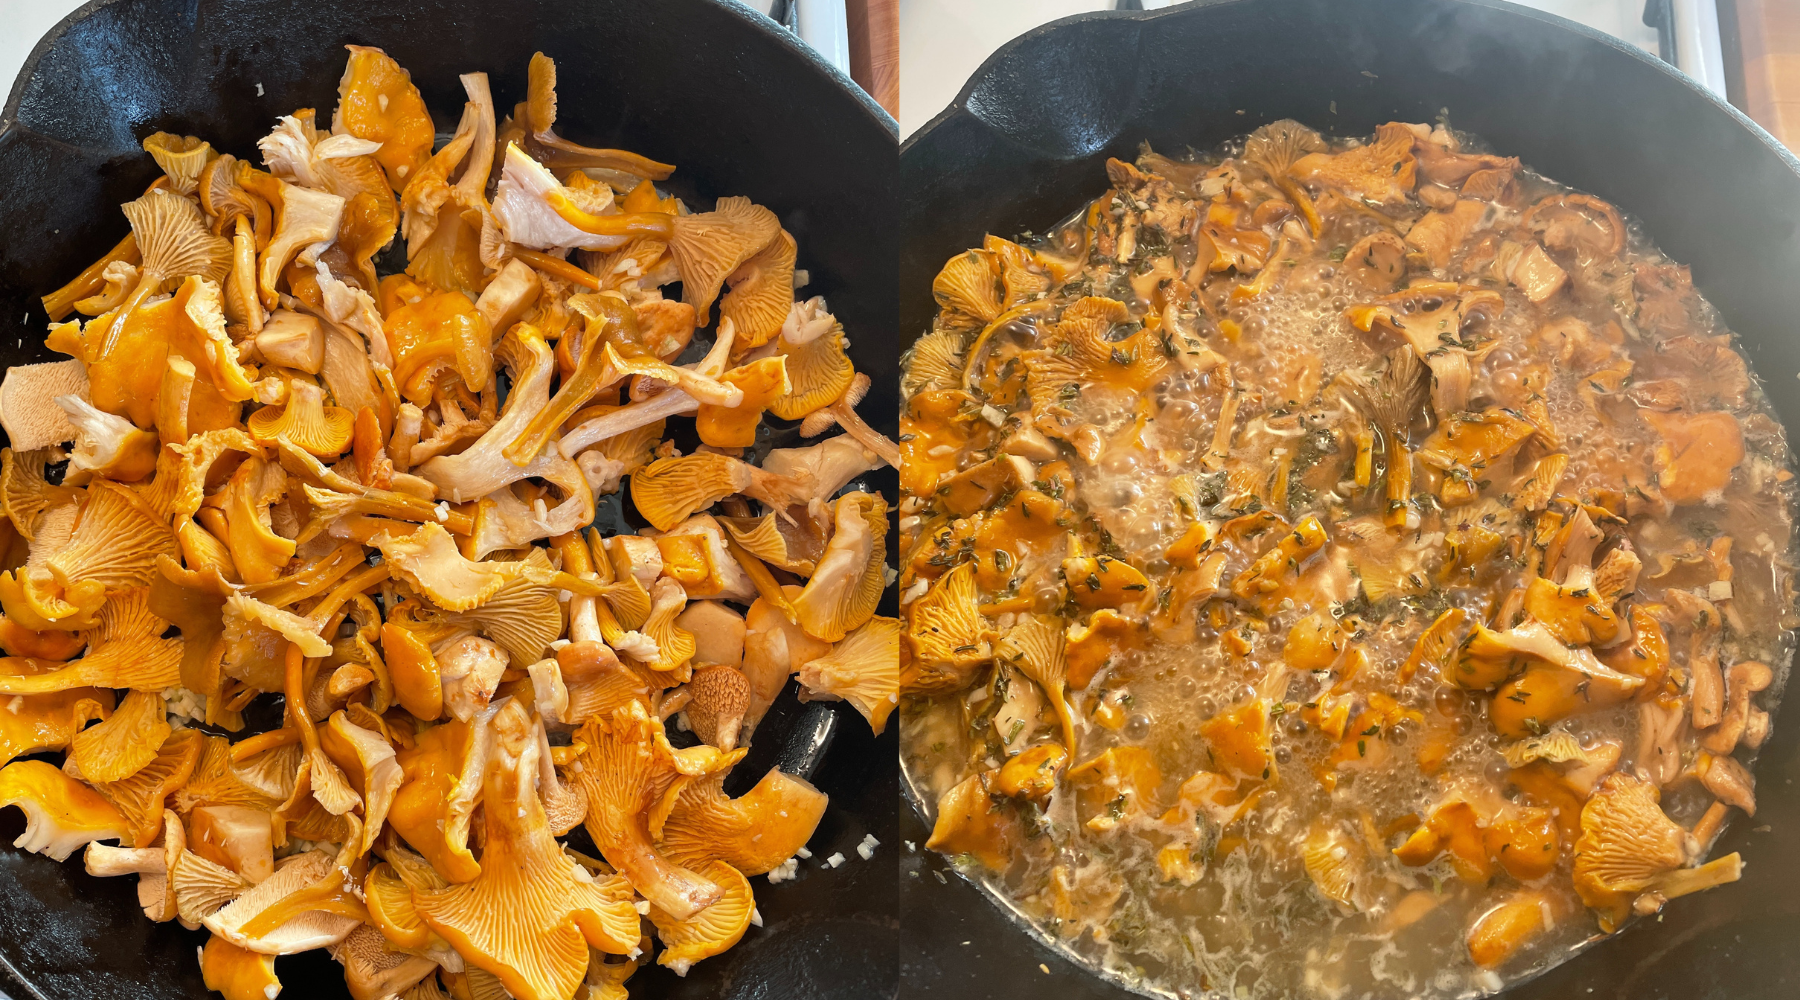 Alaska wild foraged mushrooms are sauteed in a cast iron skillet with garlic, wine, and butter